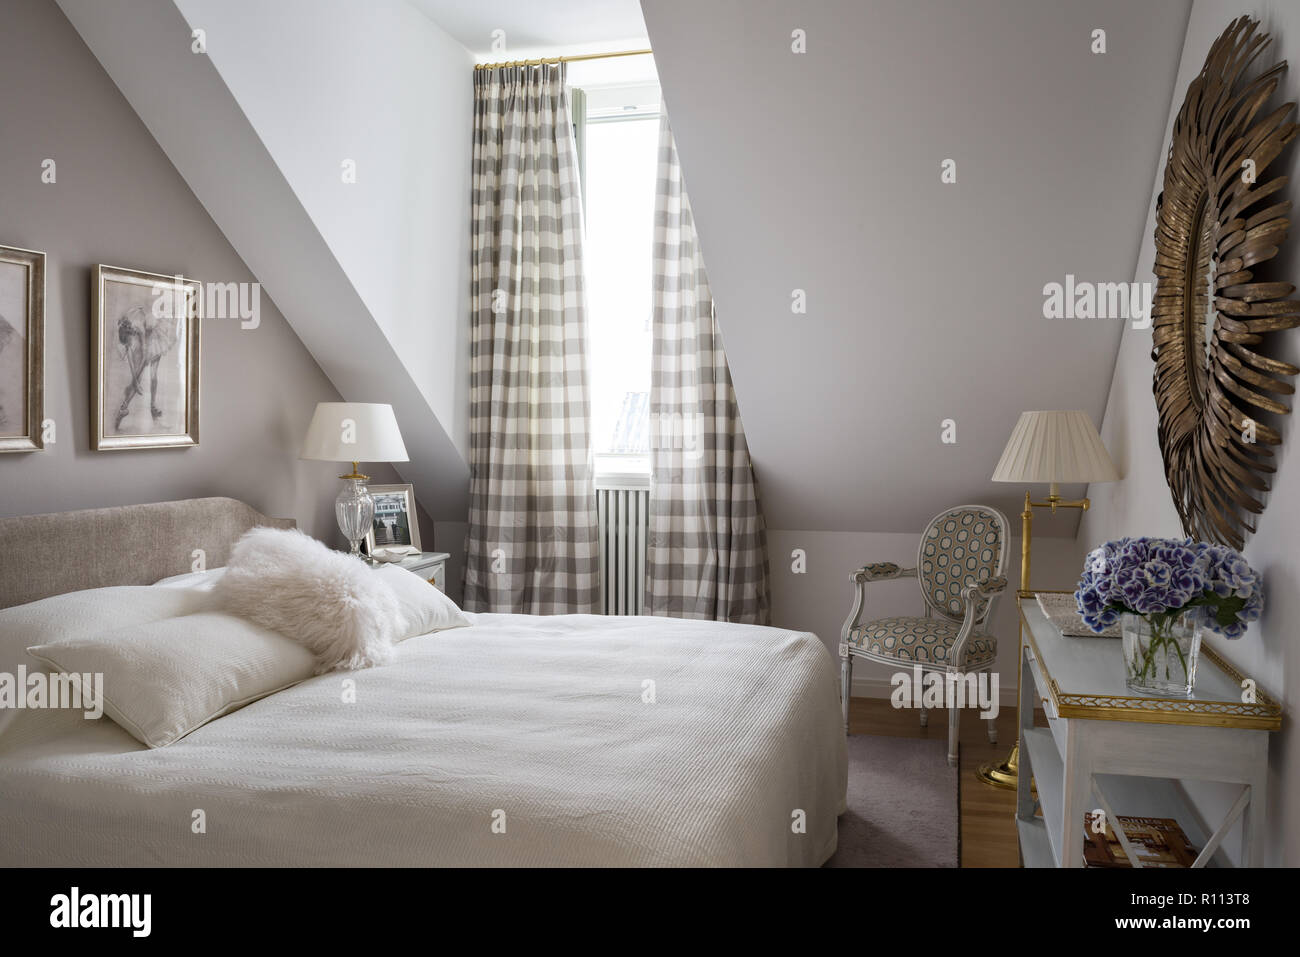 Gustavian Bedroom With Gabled Ceiling Stock Photo 224374424 Alamy